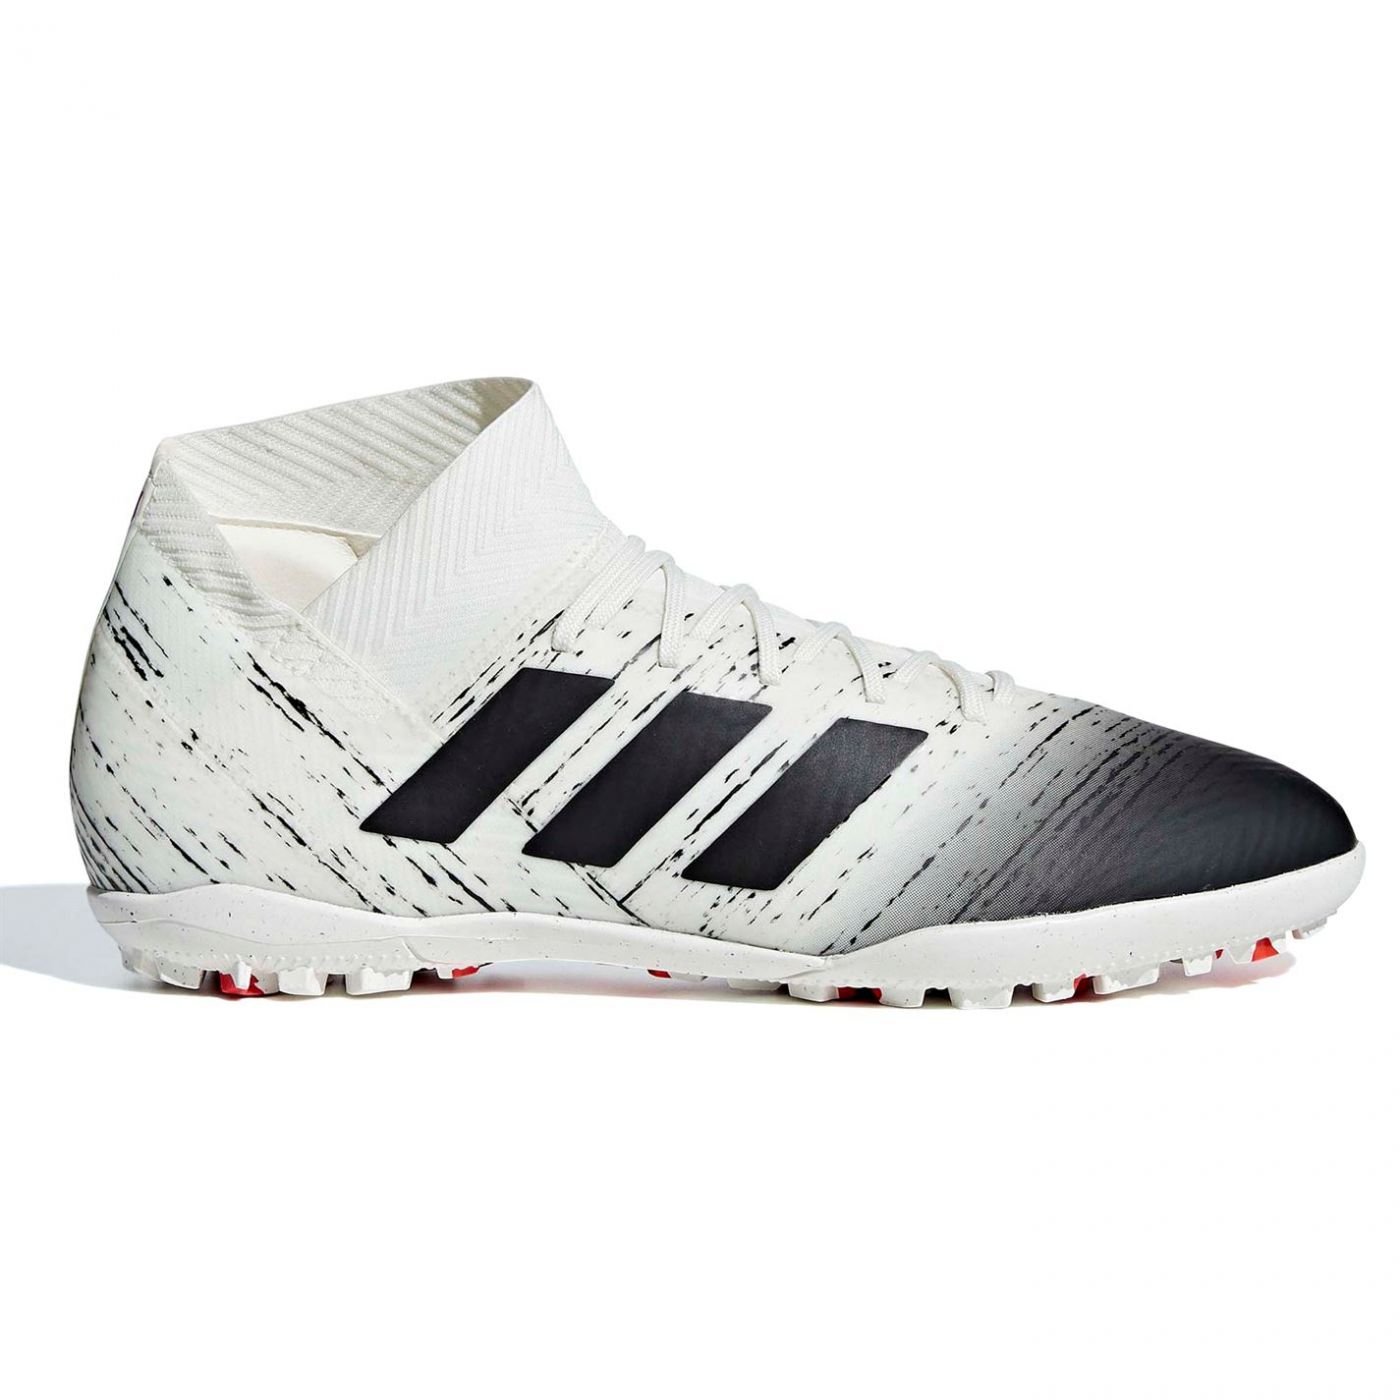 adidas shoes football cleats